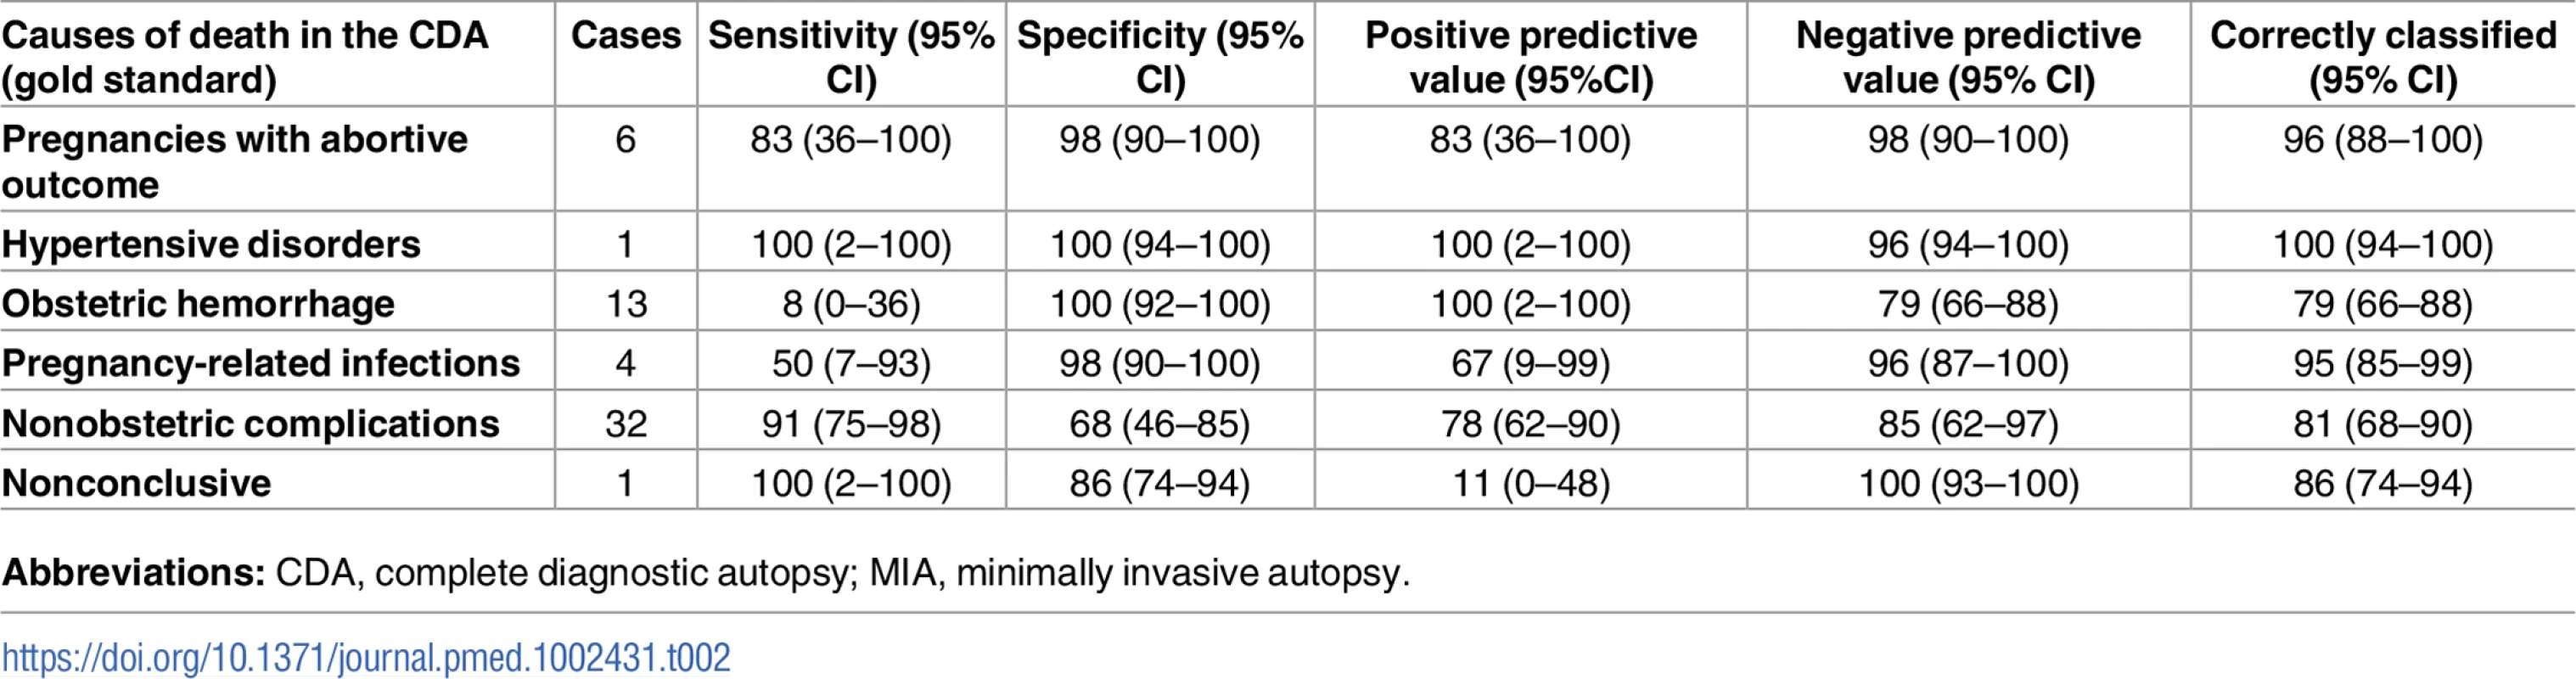 Sensitivity, specificity, positive and negative predictive value, and accuracy of the MIA for the different diagnostic categories in maternal deaths.